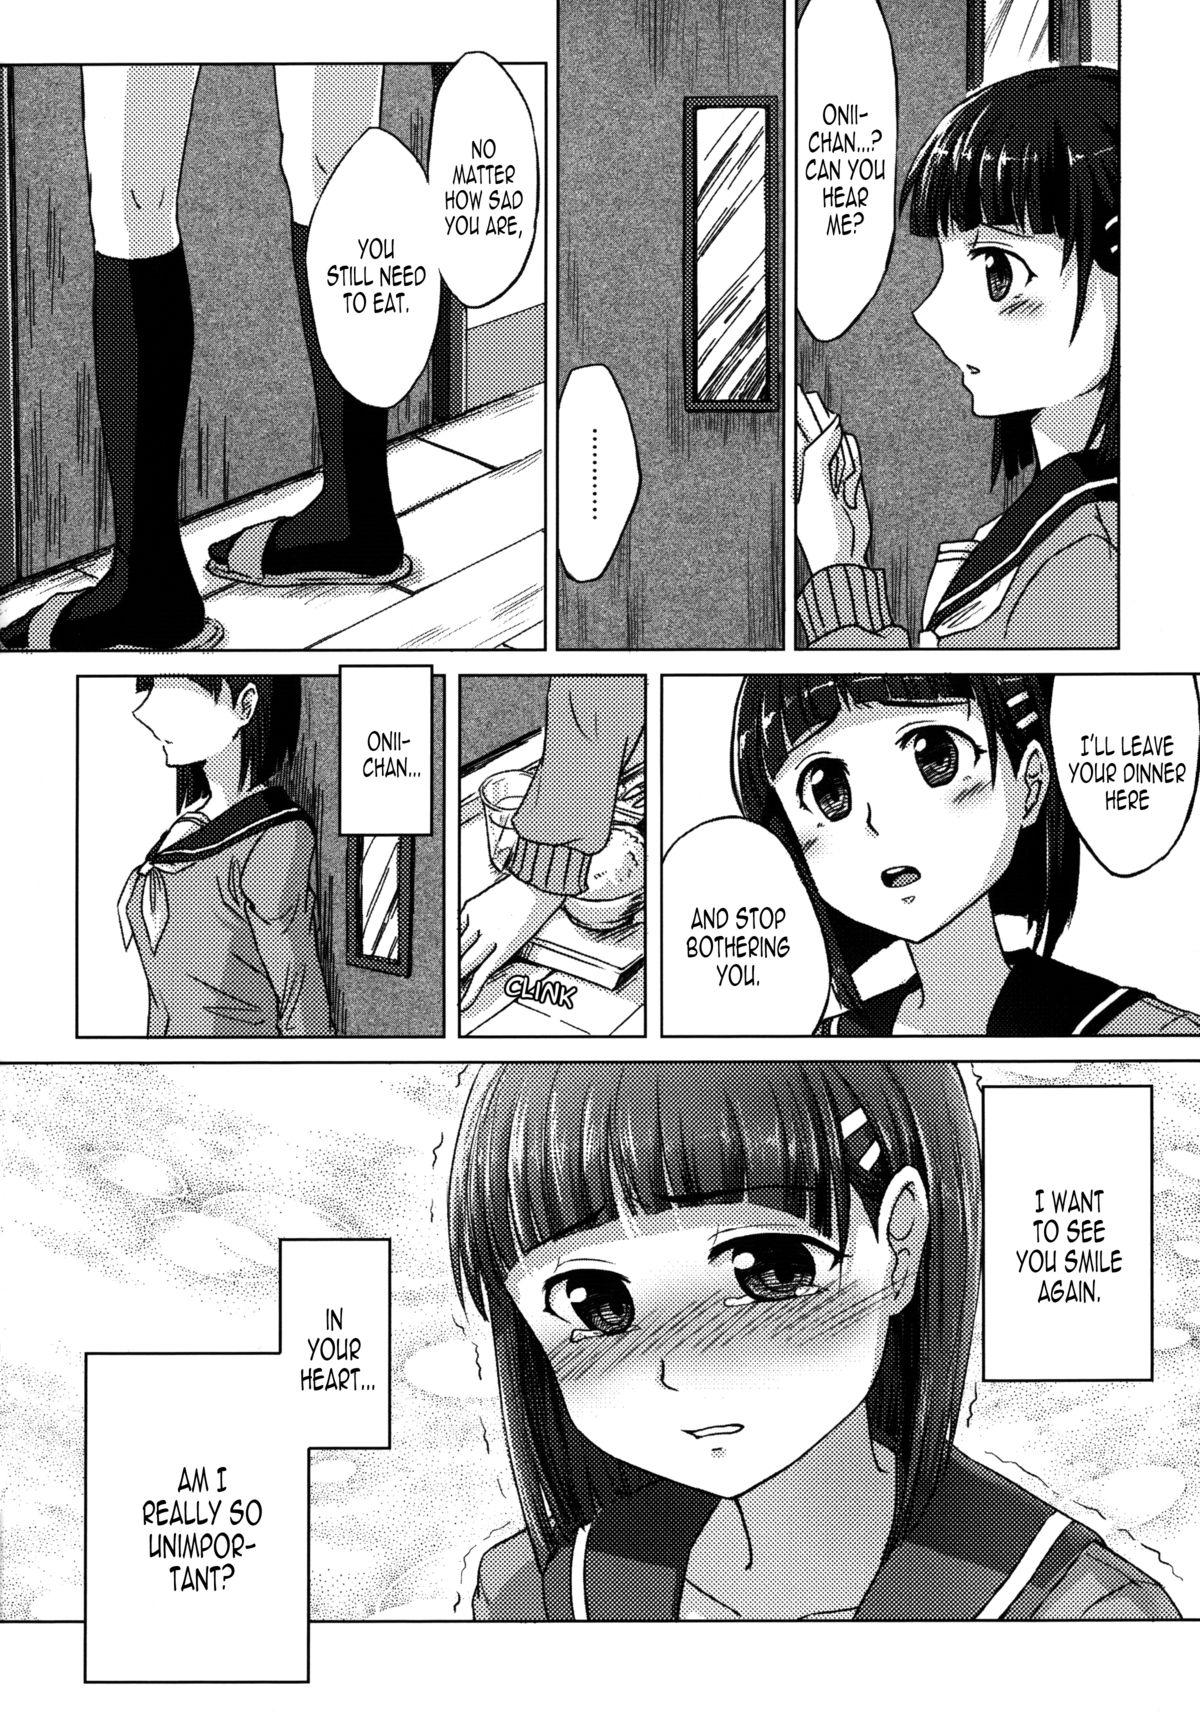 Vietnam Imouto no Mousou Record | Record of My Sister's Delusion - Sword art online Vip - Page 6